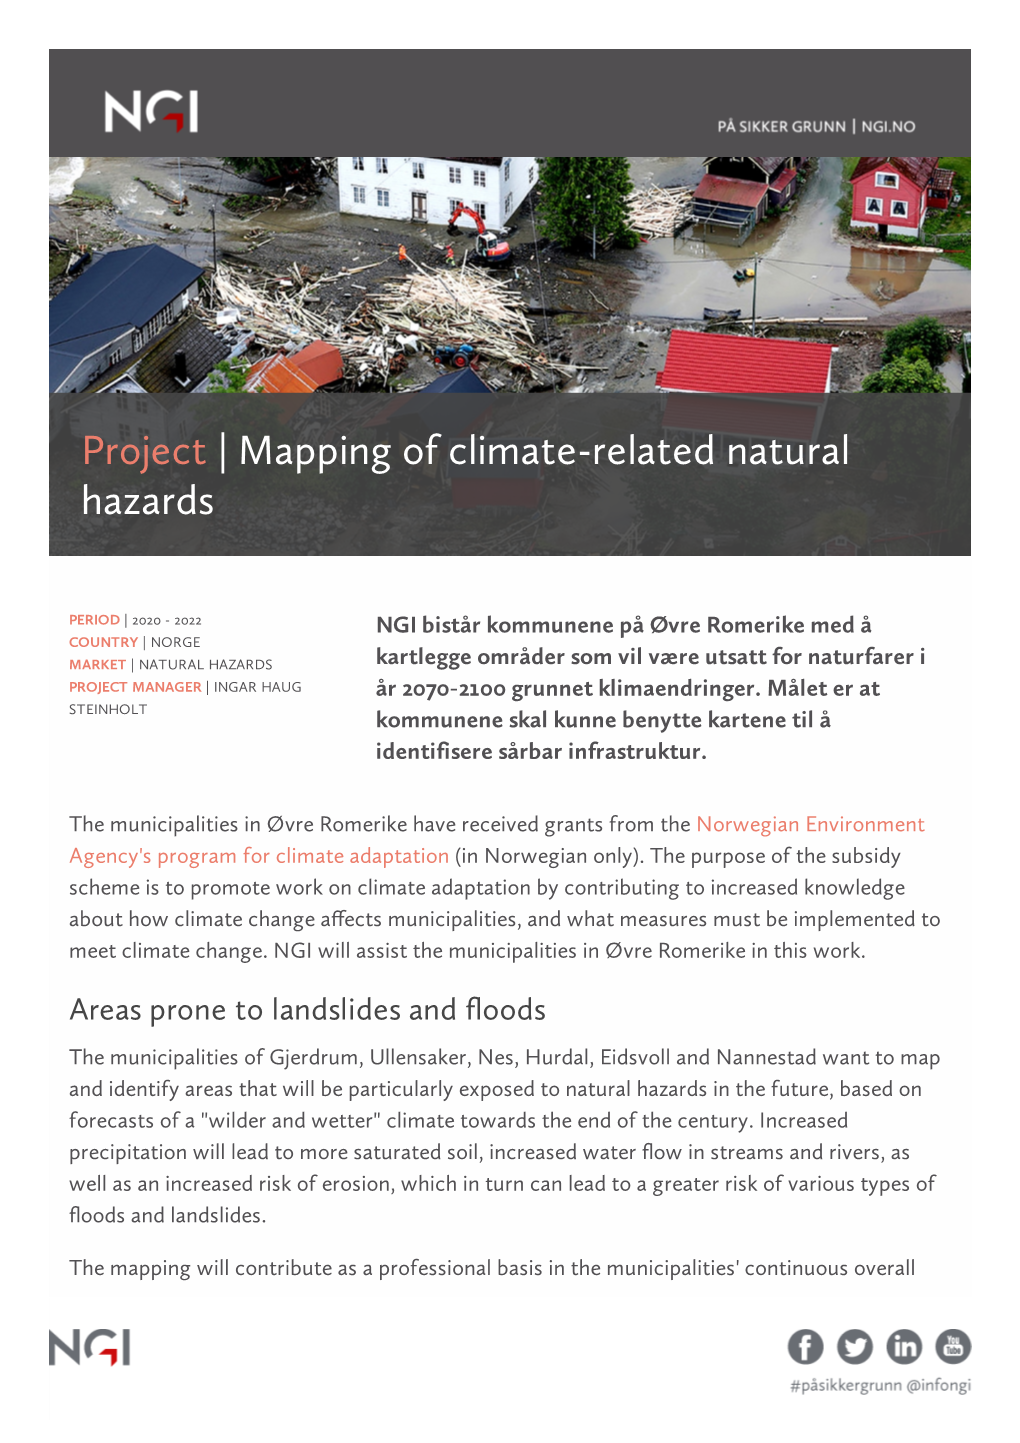 Mapping of Climate-Related Natural Hazards